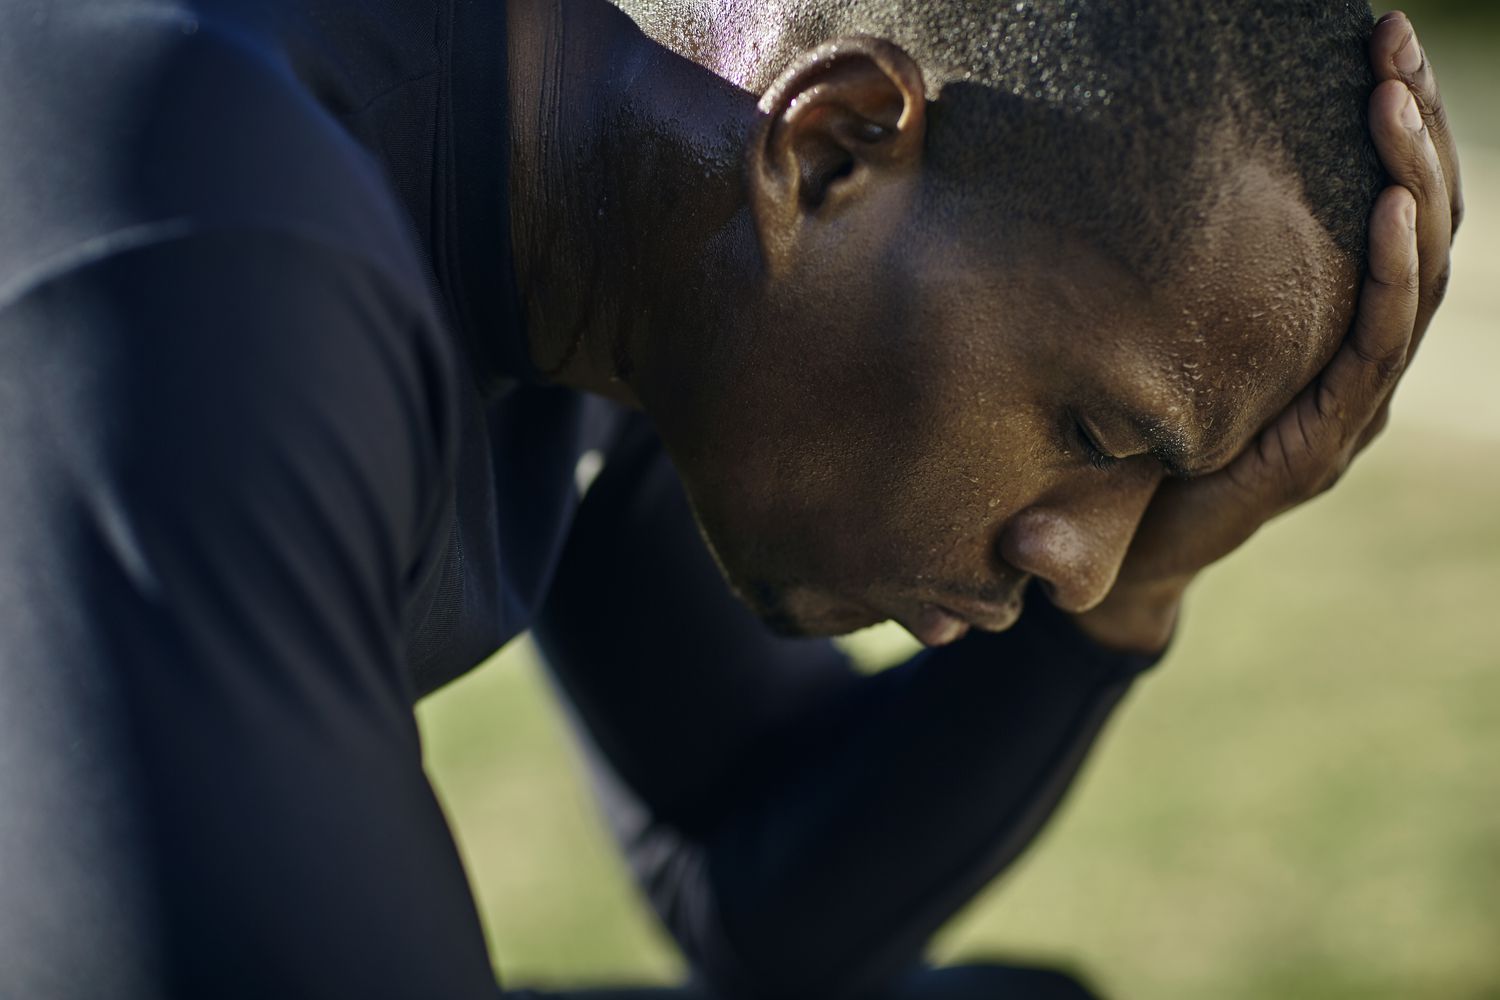 Athlete concentrating with his eyes closed